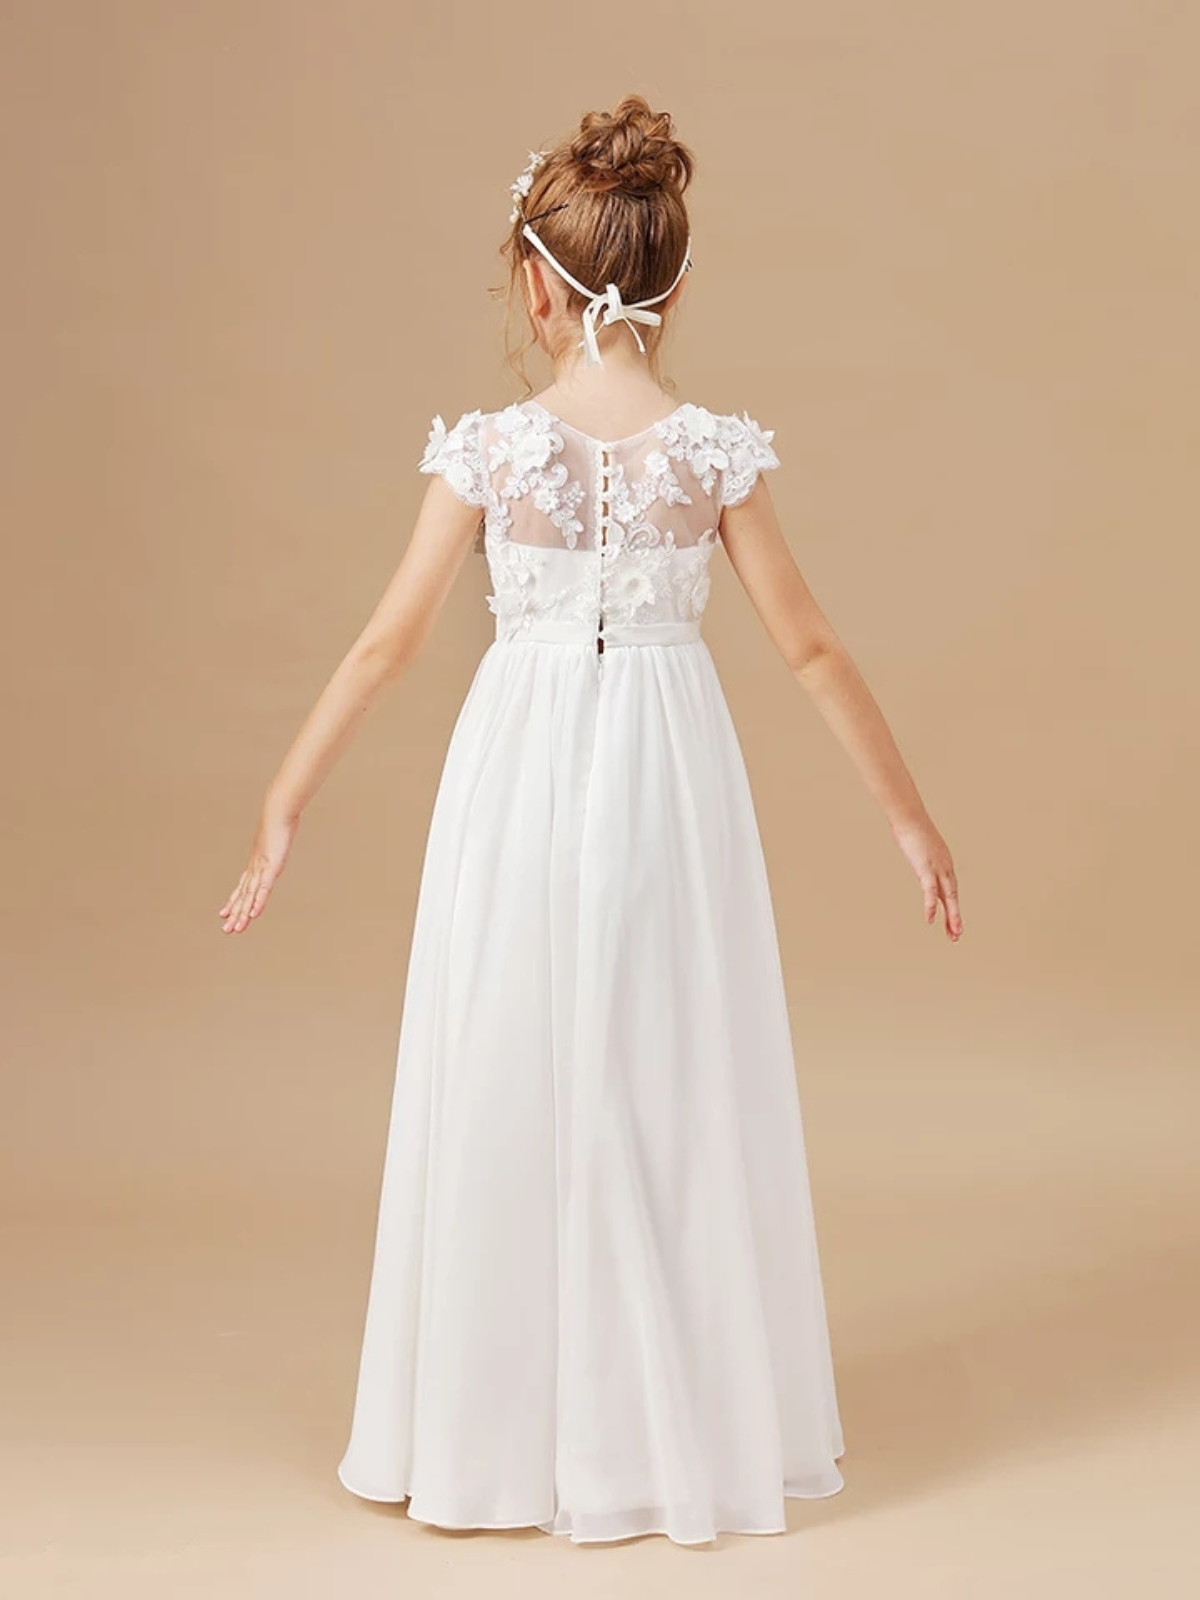 Girls Communion Dresses | White Floral Mesh Embroidered Empire Dress